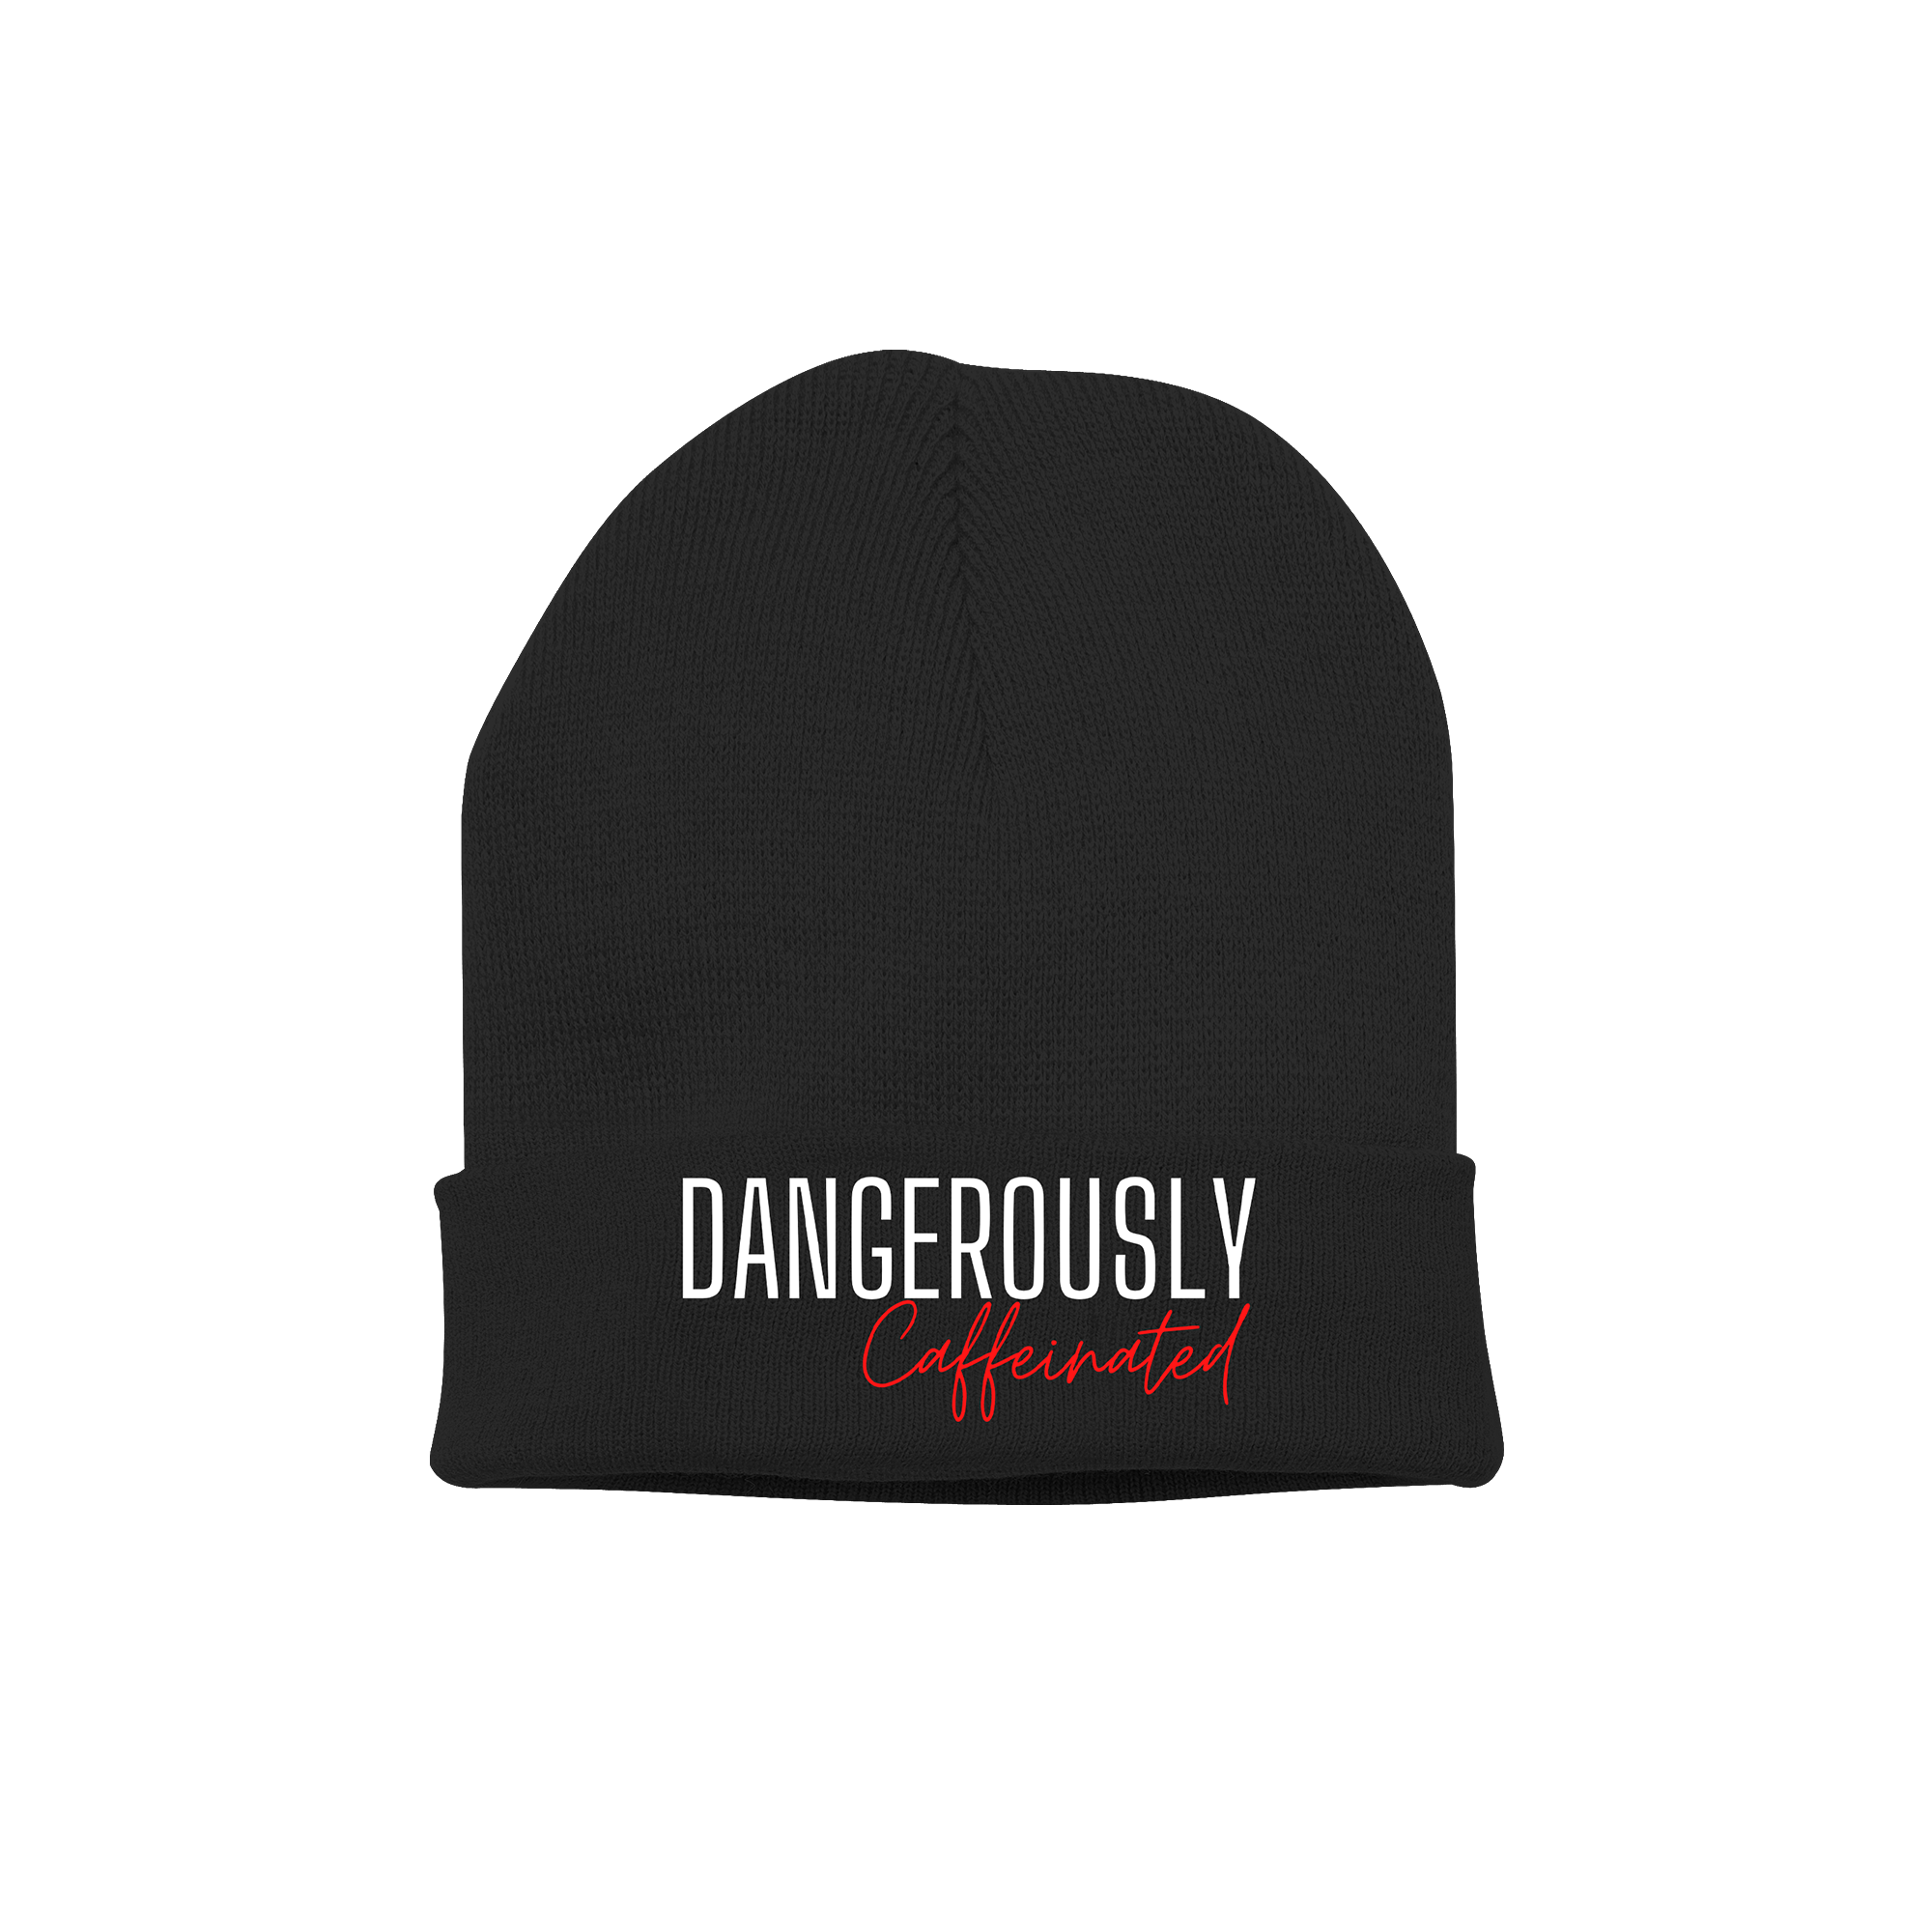 Kevin Cooney - Dangerously Caffeinated Beanie